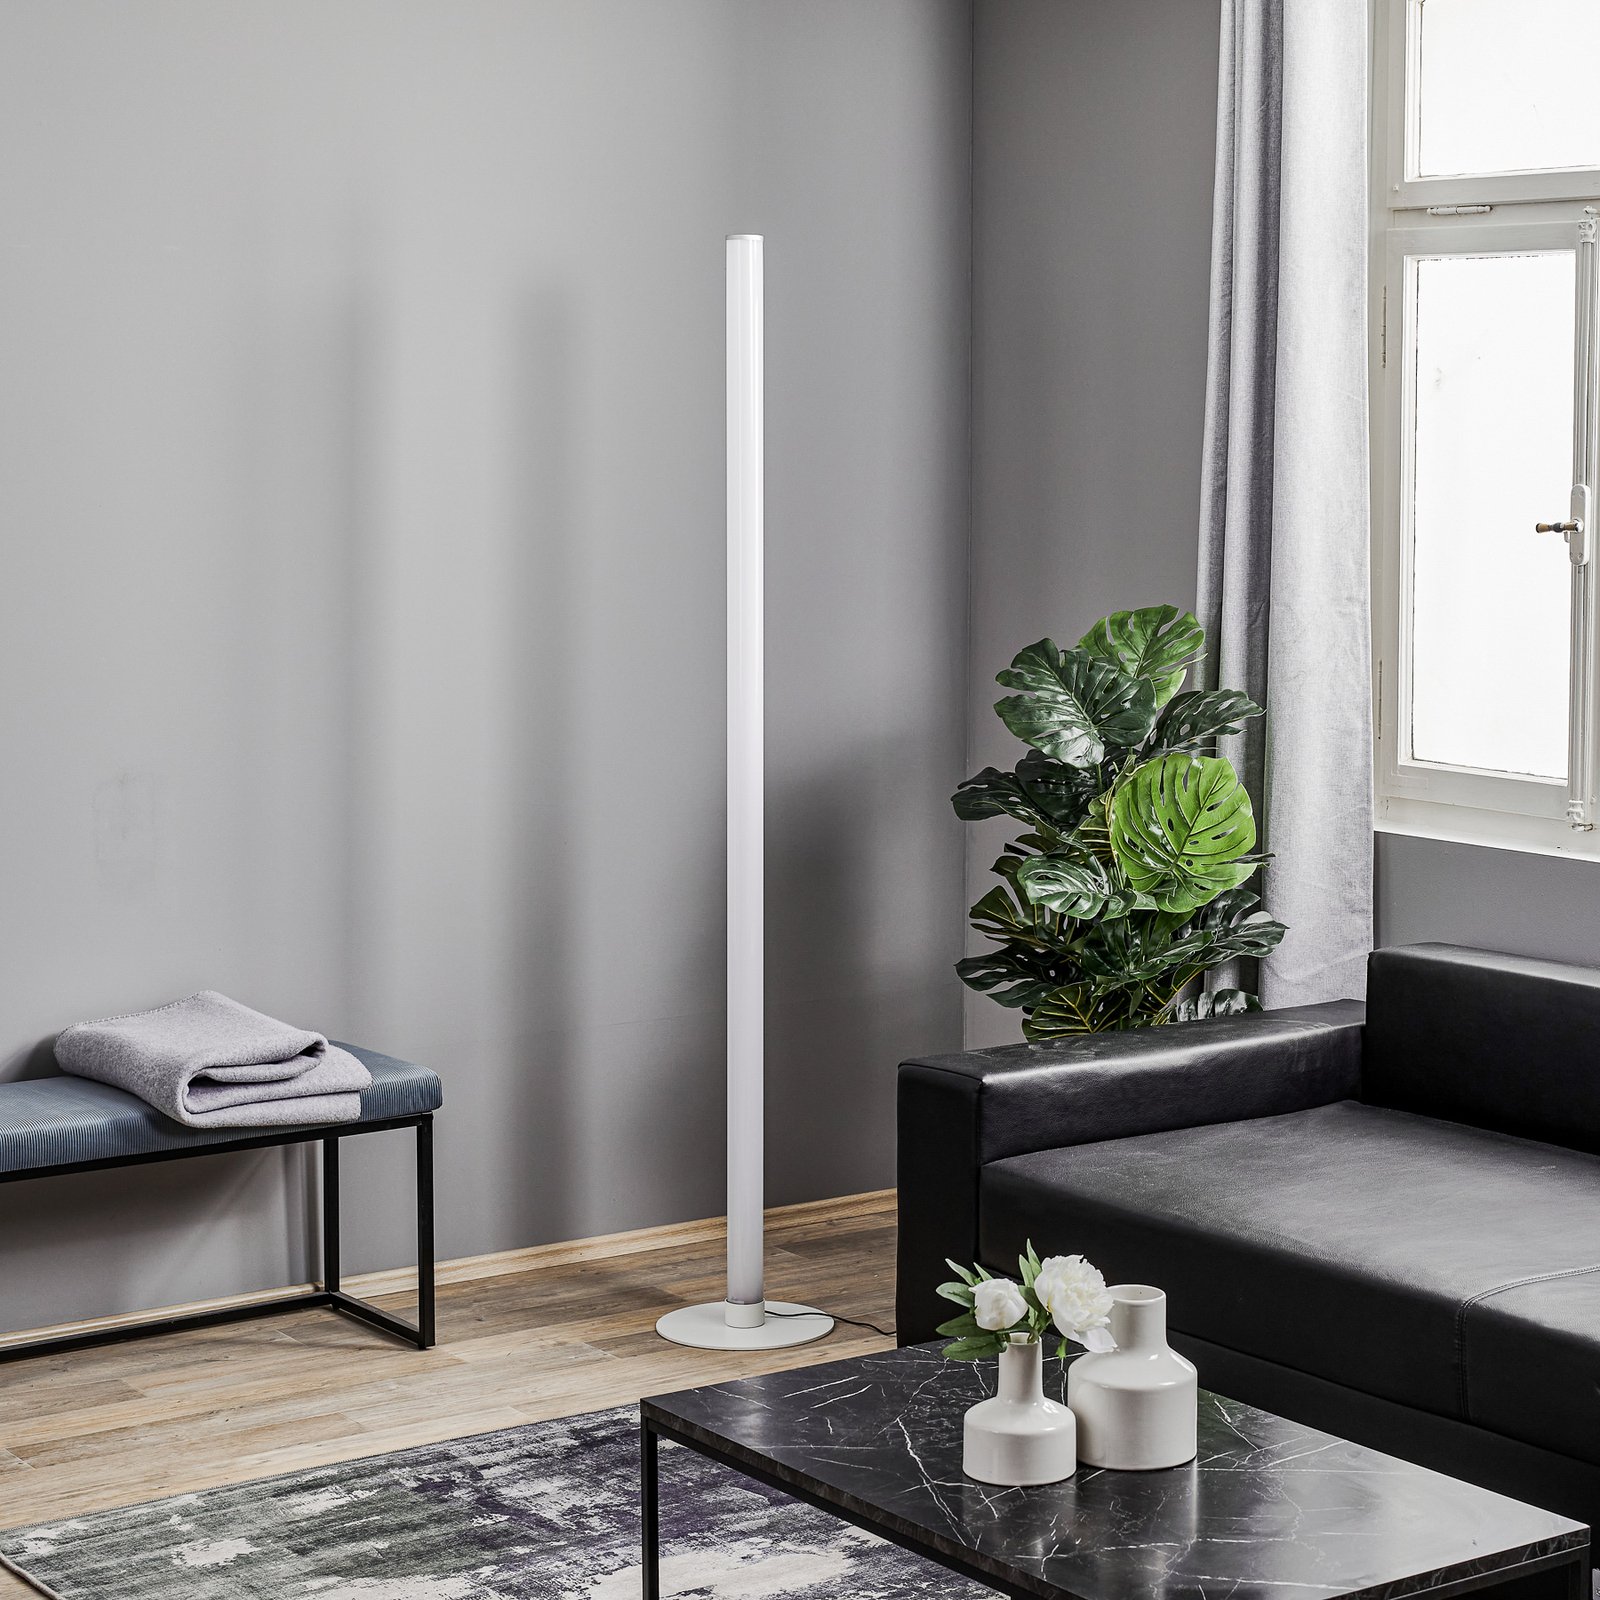 Pirgos LED floor lamp with dimmer, height 180 cm